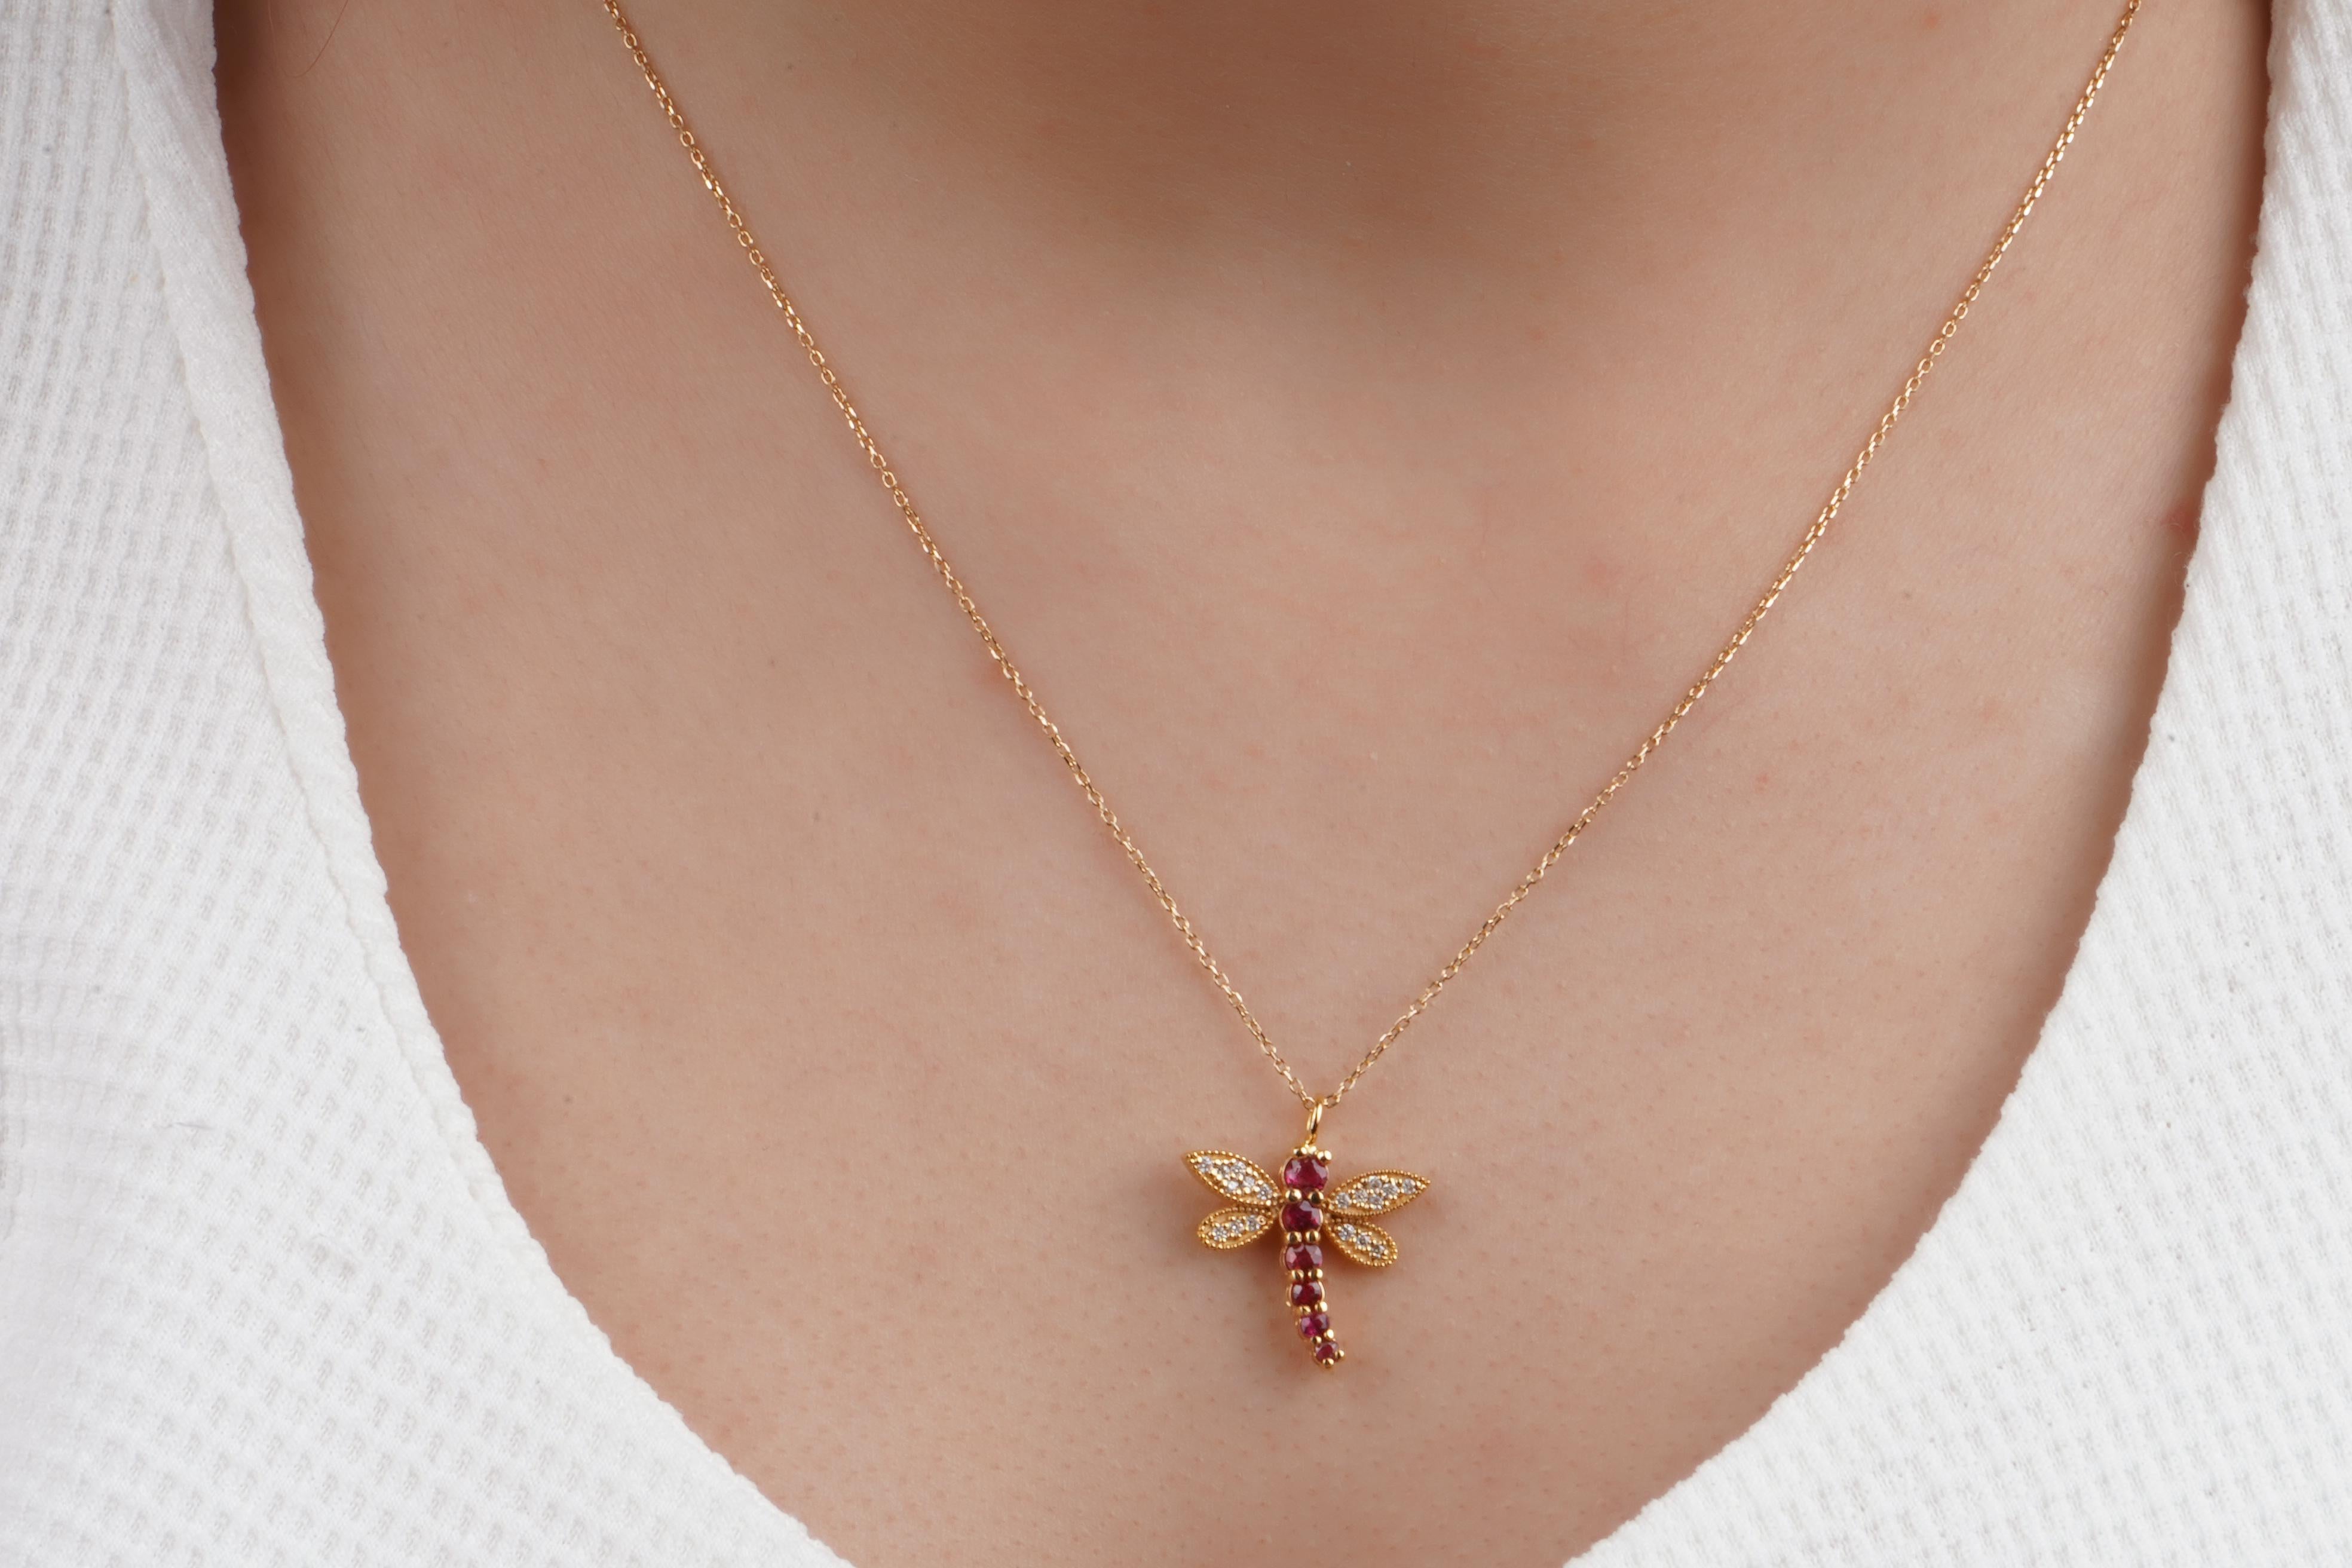 If you are looking for a unique and meaningful gift for yourself or someone special, you will love our 18k solid gold dragonfly pendant with chain!

This pendant is not just a beautiful accessory, but also a symbol of your personality and values. It